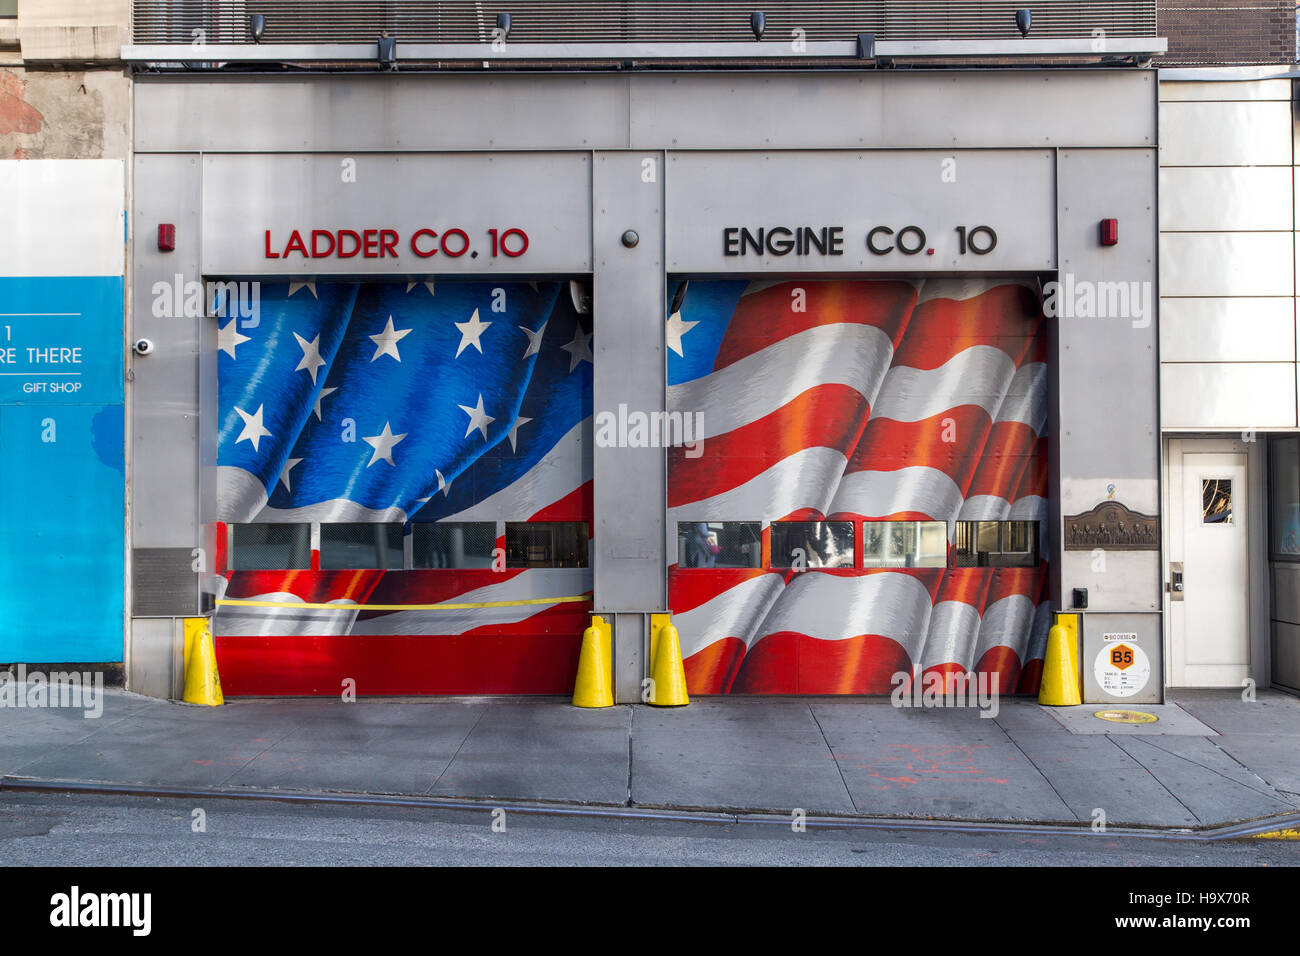 New York, United States of America - November 18, 2016: FDNY Engine 10 and Ladder 10 Firehouse across from World Trade Center site and the 9-11 Memori Stock Photo